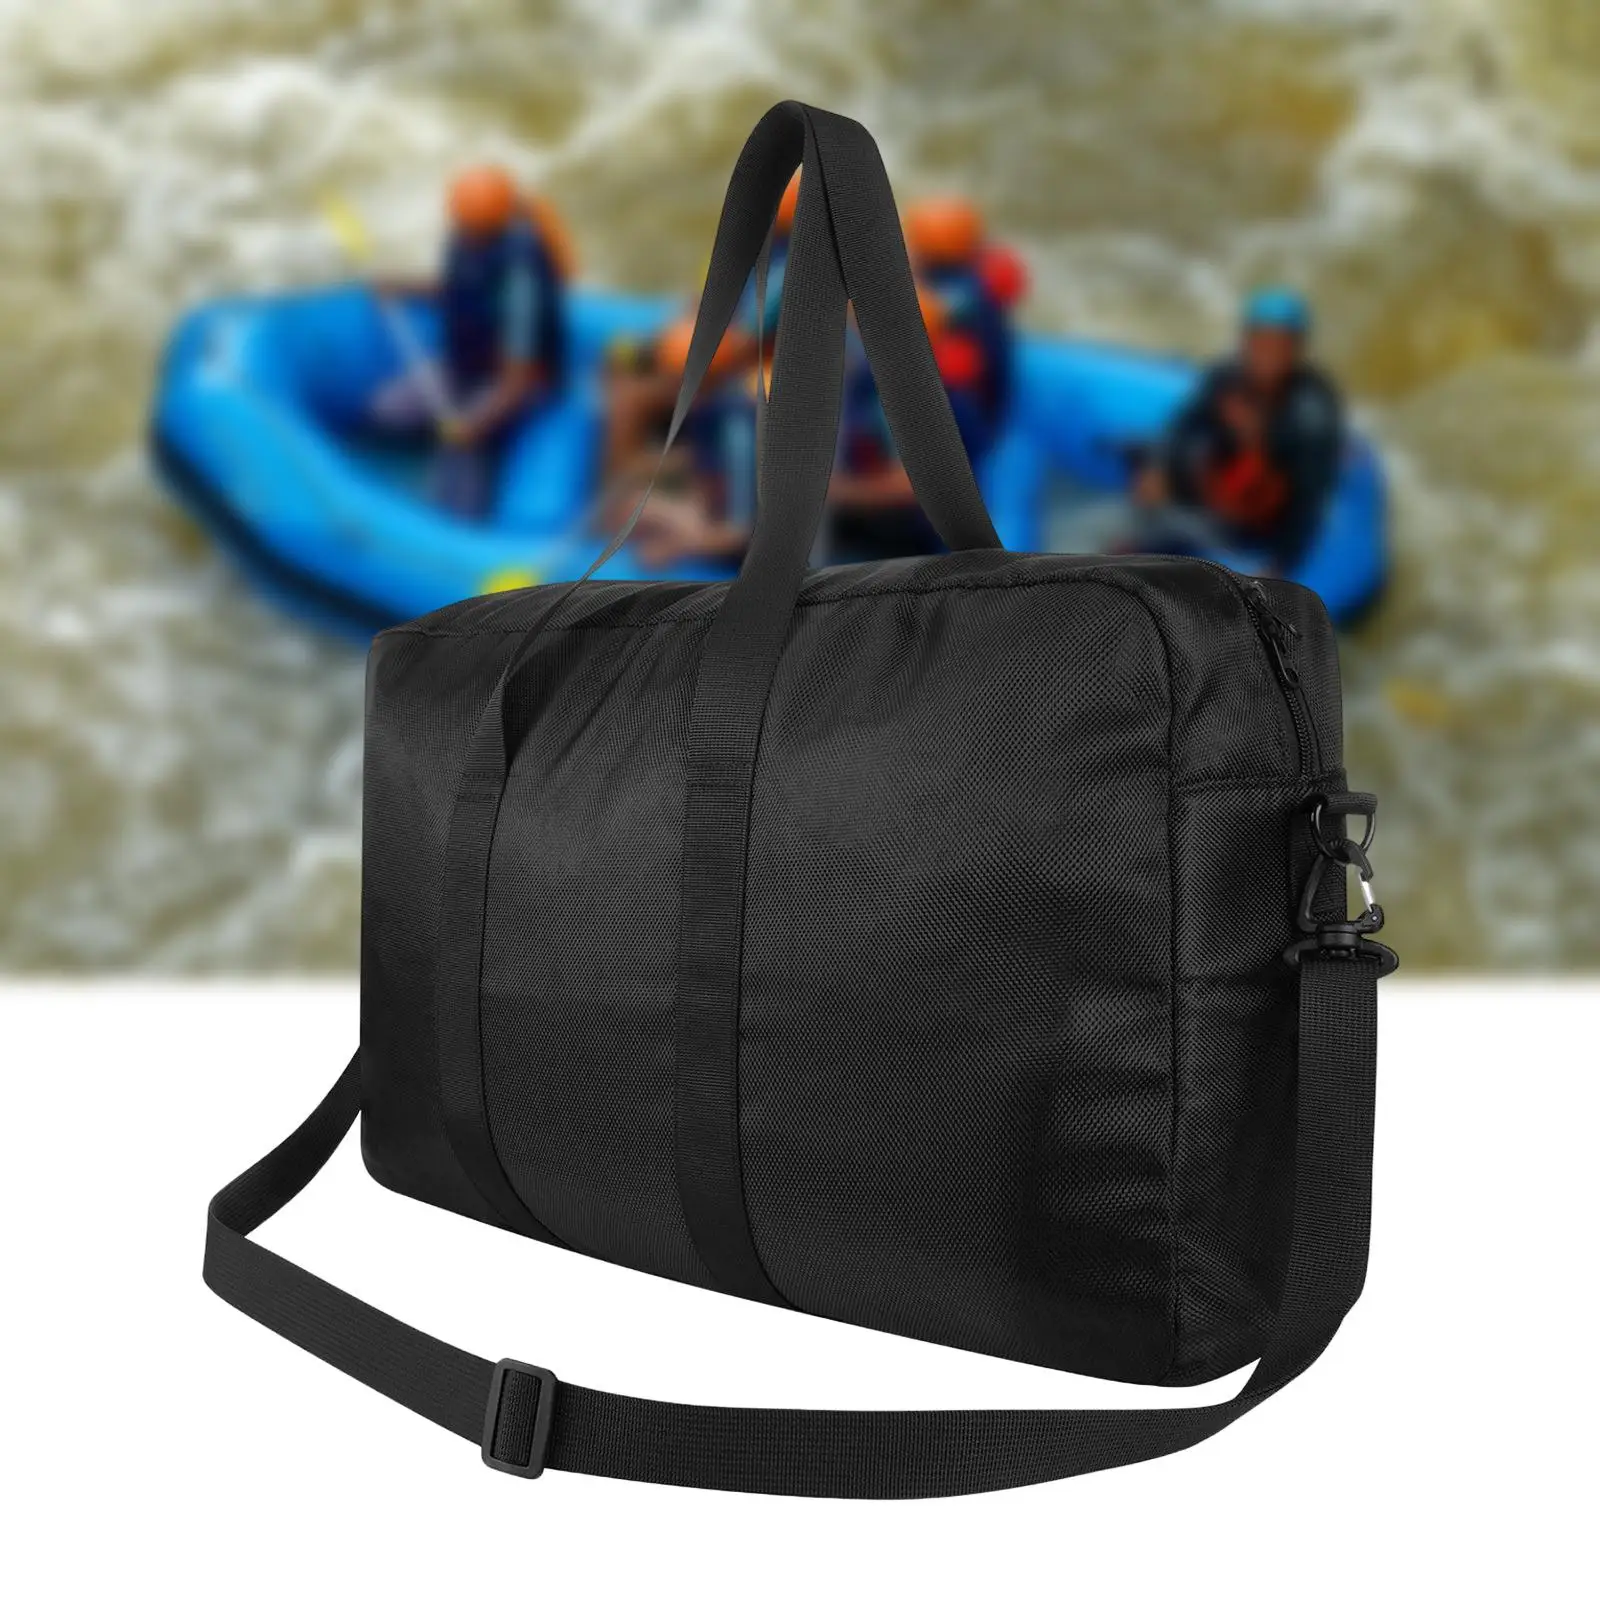 Inflatable Kayak Storage Bag Waterproof Shoulder Carrying Bag Carry Handles Luggage Tote Pouch for Fishing Picnic Travel Camping